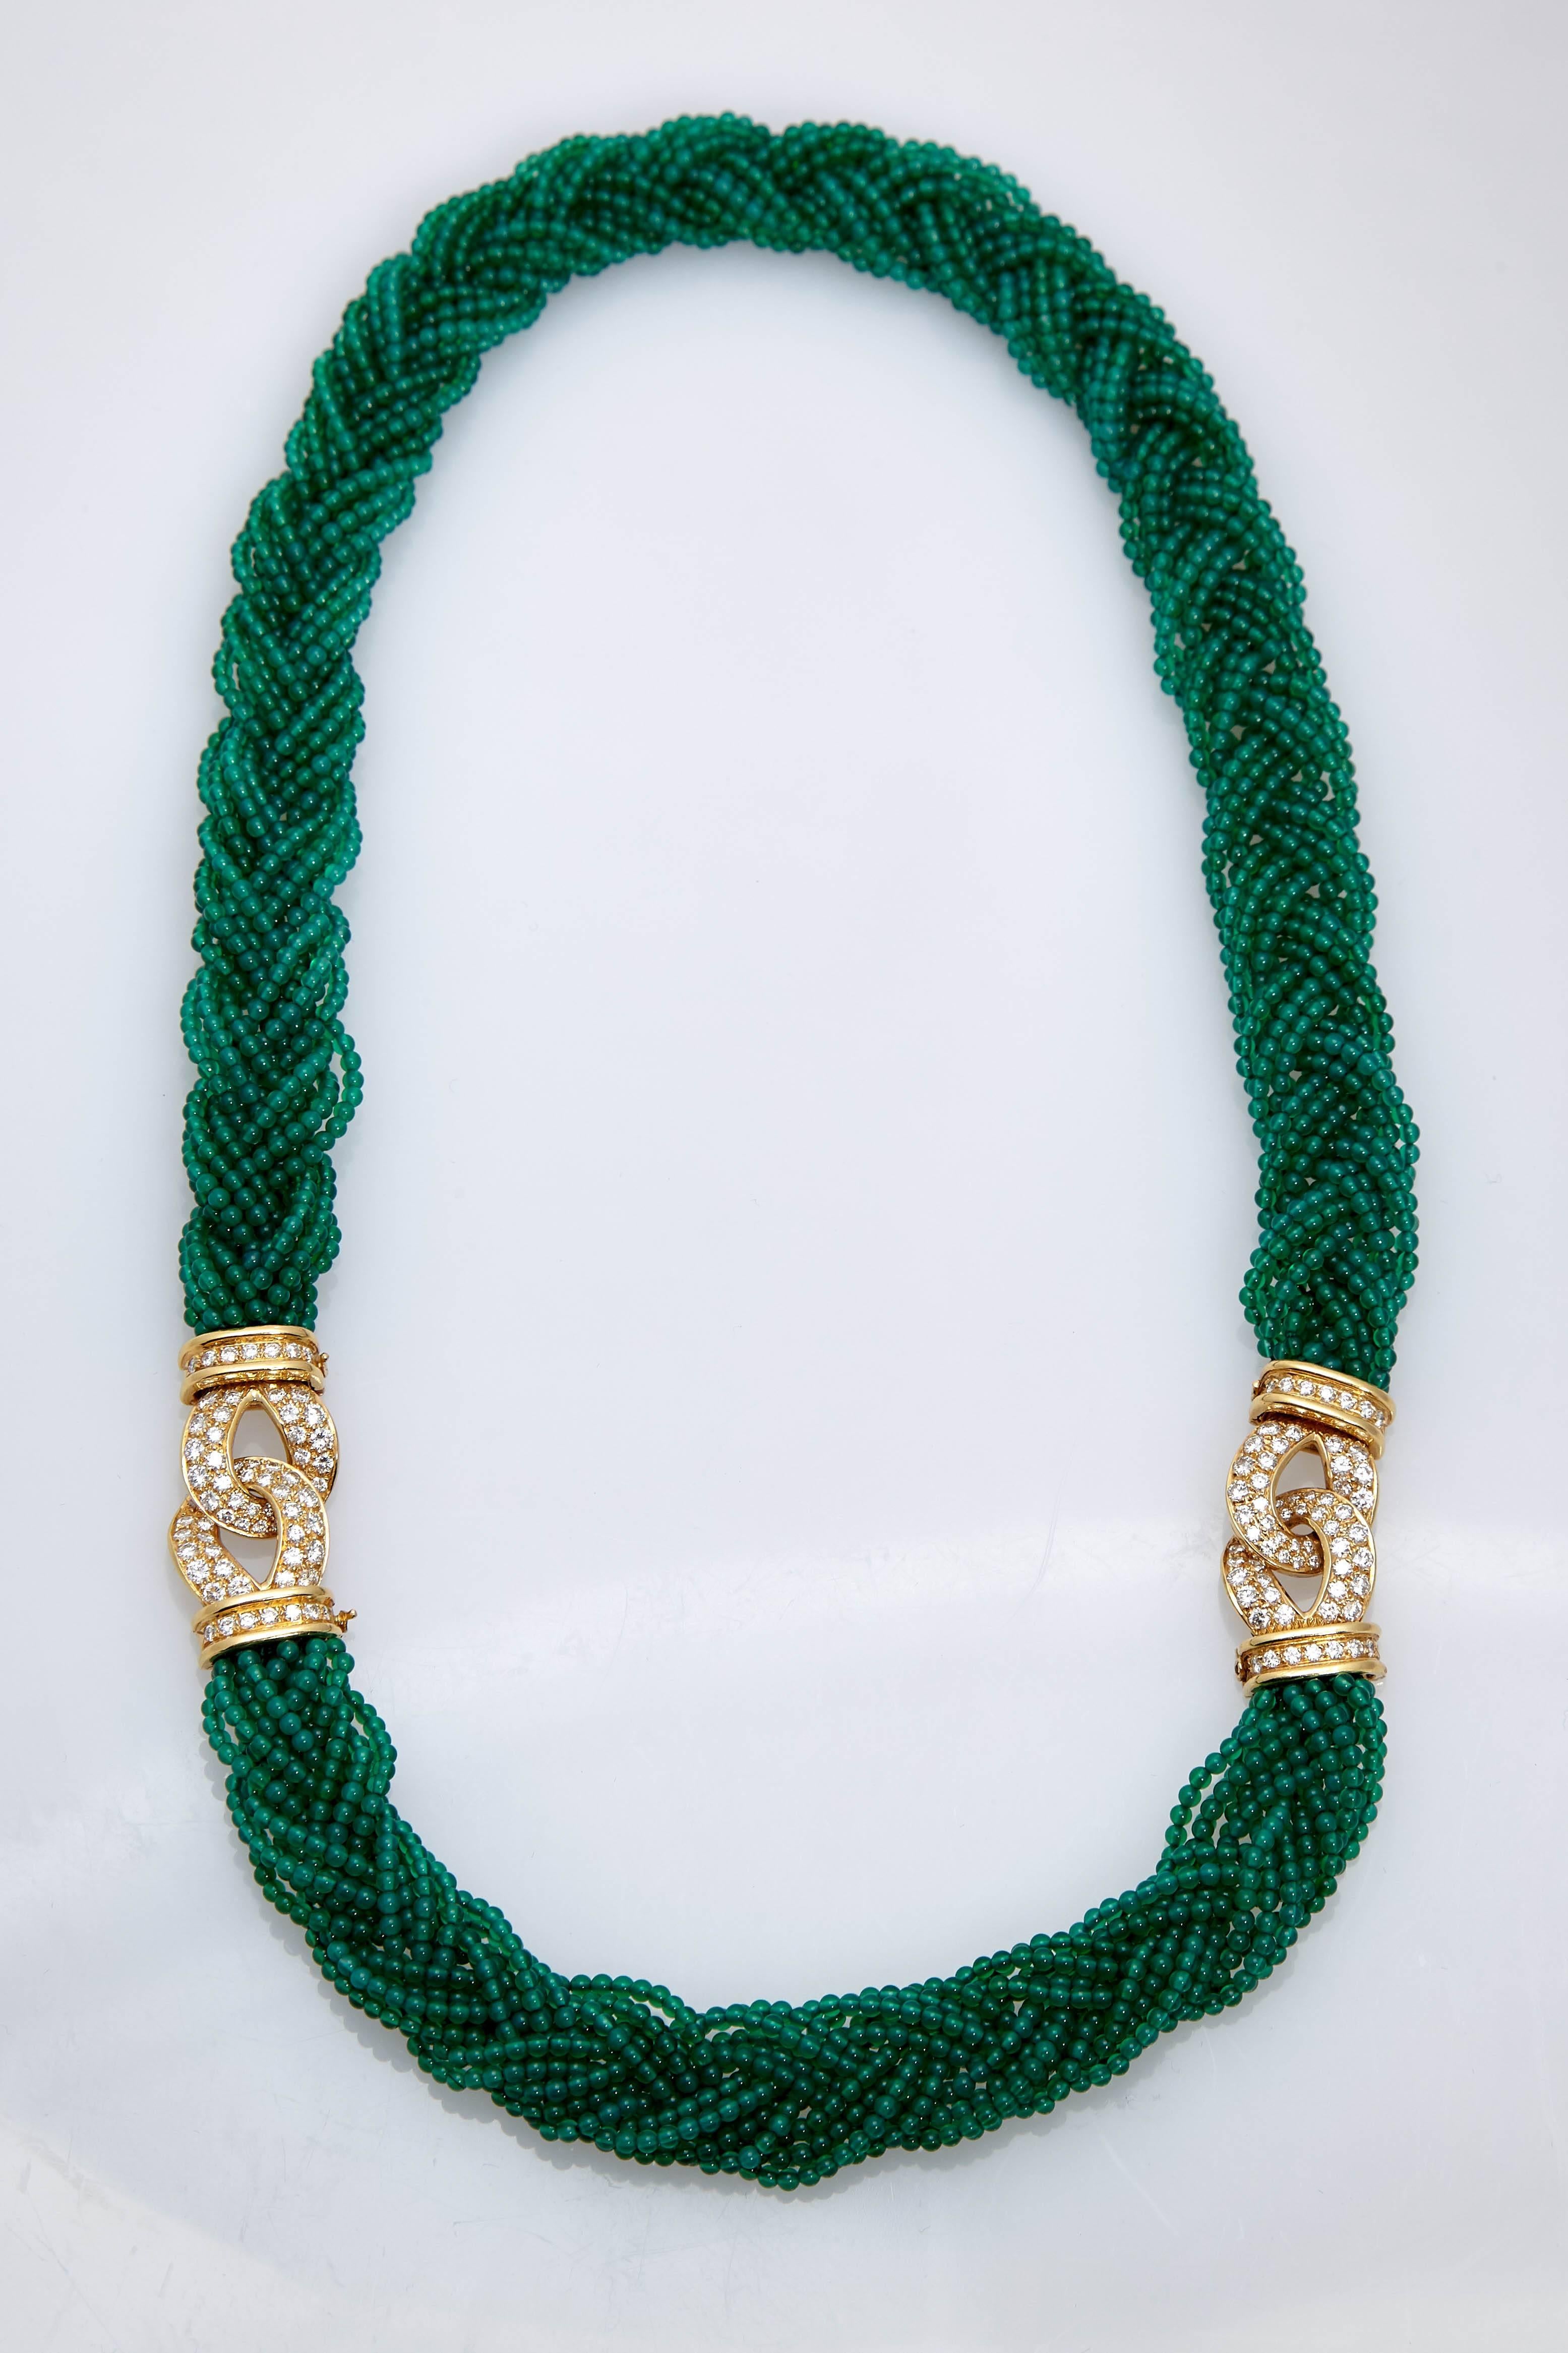 A beautiful torchon necklace by Van Cleef & Arpels with chrysoprase beads, clasped together by two marine not 18kt gold and diamond elements. Made in France, circa 1980